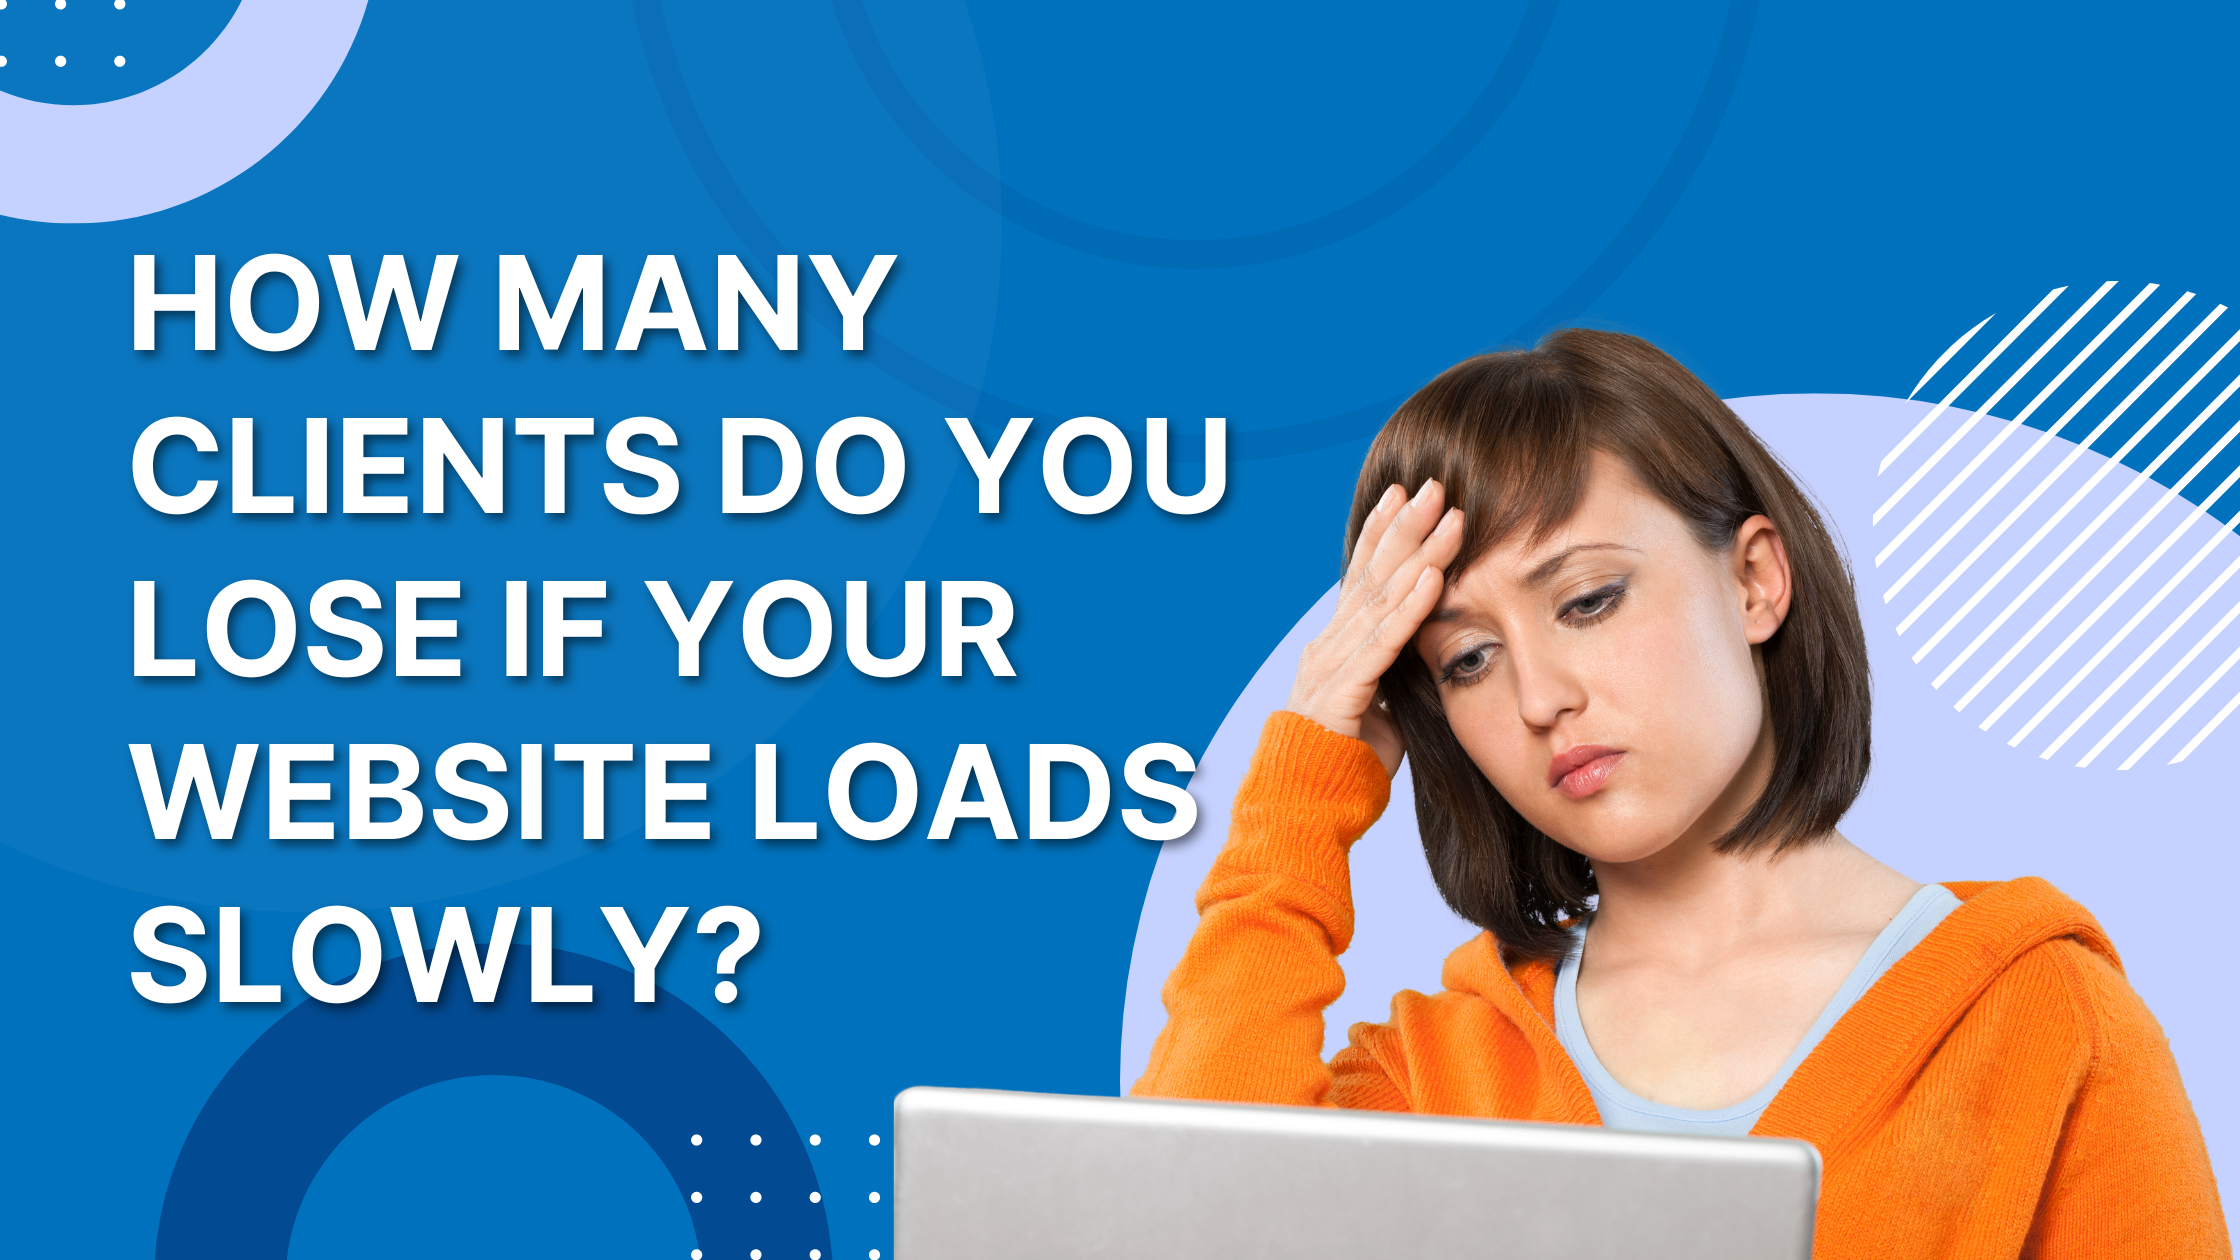 How many clients do you lose if your website loads slowly?